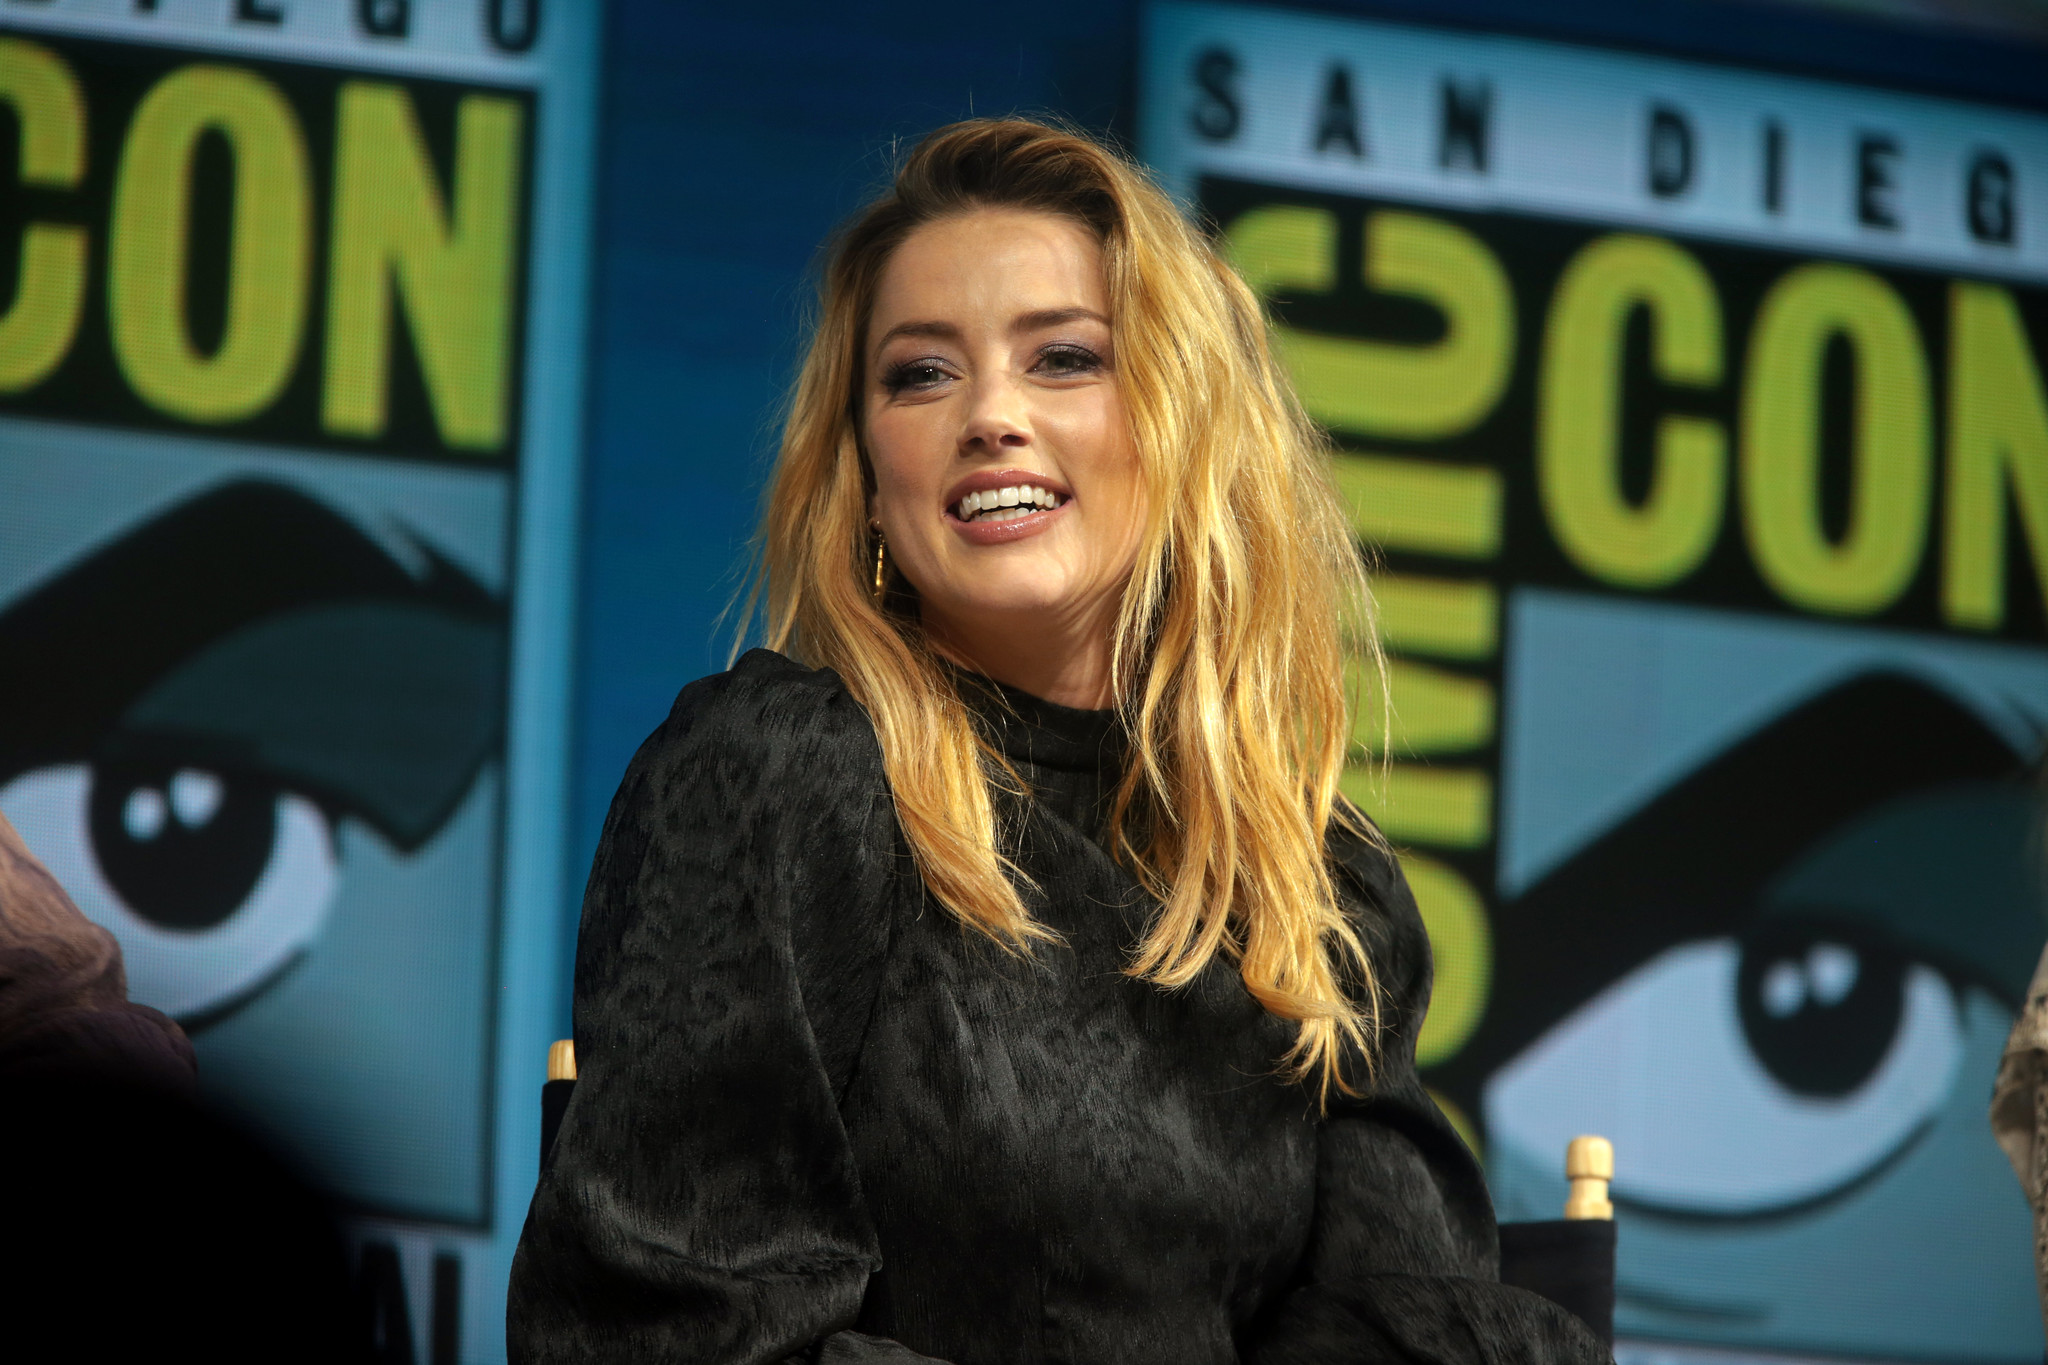 Amber Heard at San Diego Comic Con. She is on a panel and is smiling at the audience.